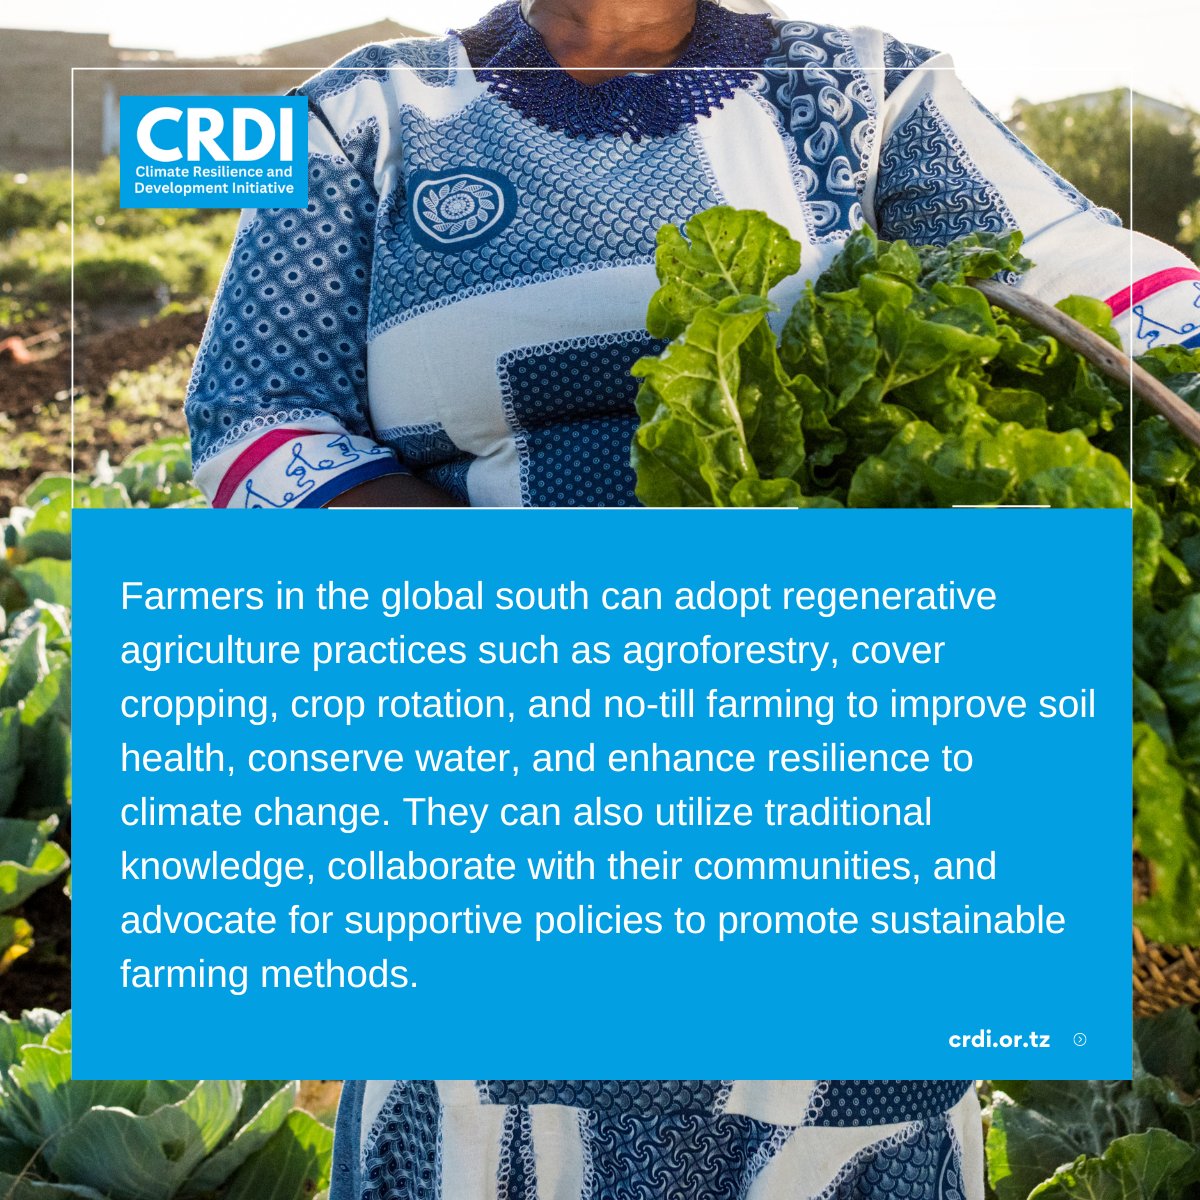 Farmers in the global south can adopt regenerative agriculture practices.
#RegenerativeAgriculture #GlobalSouthFarmers #SustainableFarming #Agroforestry #CoverCropping #CropRotation #NoTillFarming #WaterConservation #ClimateResilience #TraditionalKnowledge #CommunityCollaboration